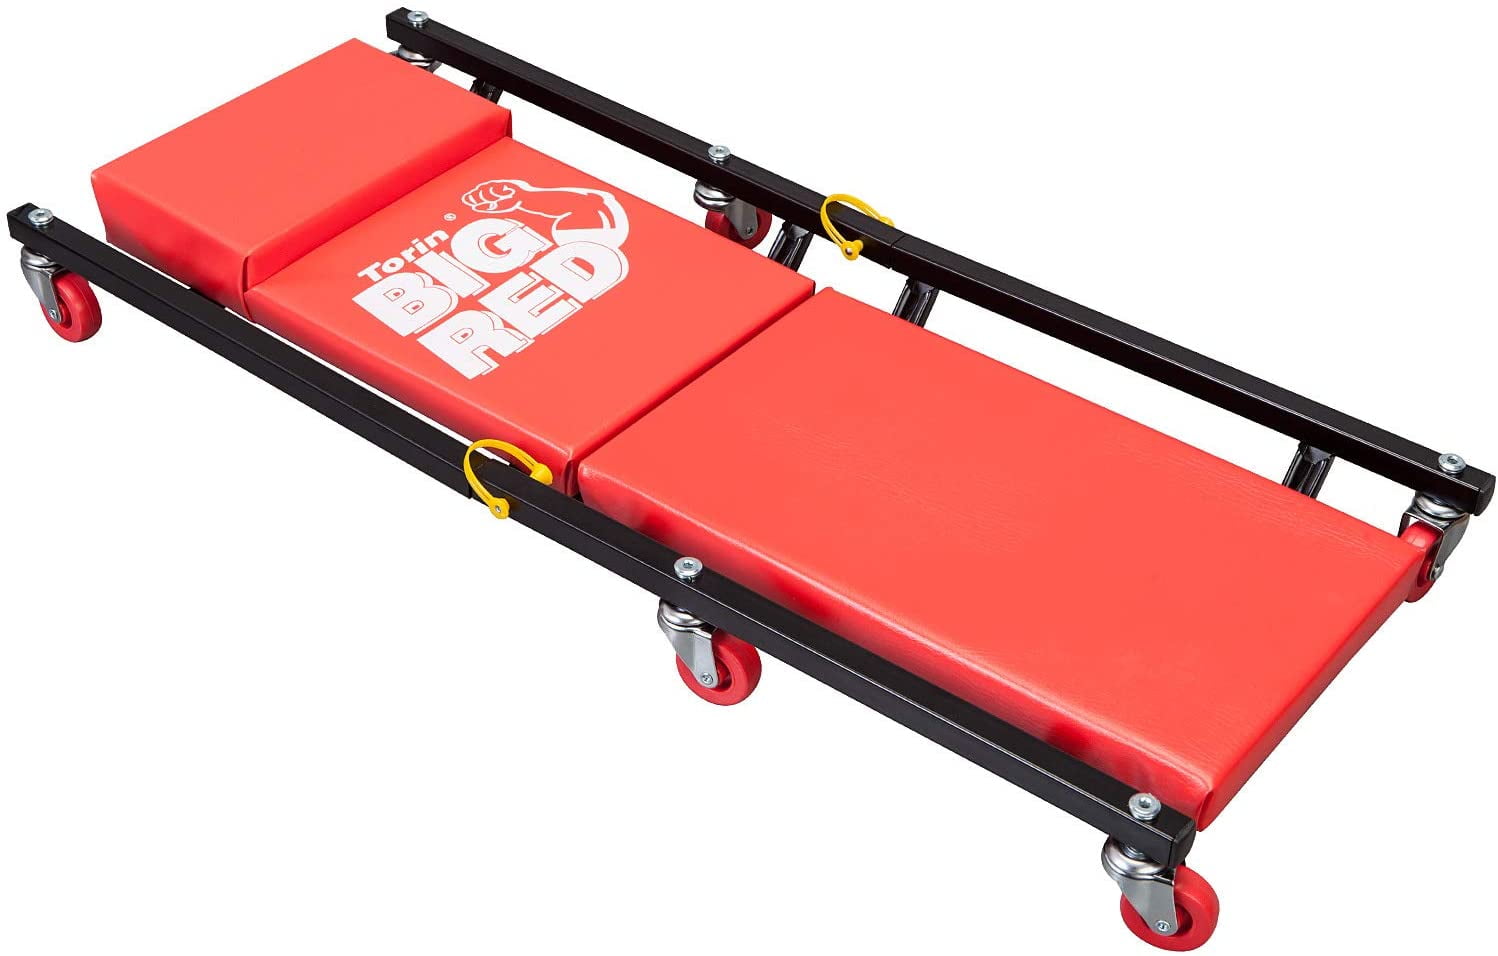 Torin Big Red Rolling Garage/Shop Creeper 40 Plastic Mechanic Cart with Padded Headrest Red 